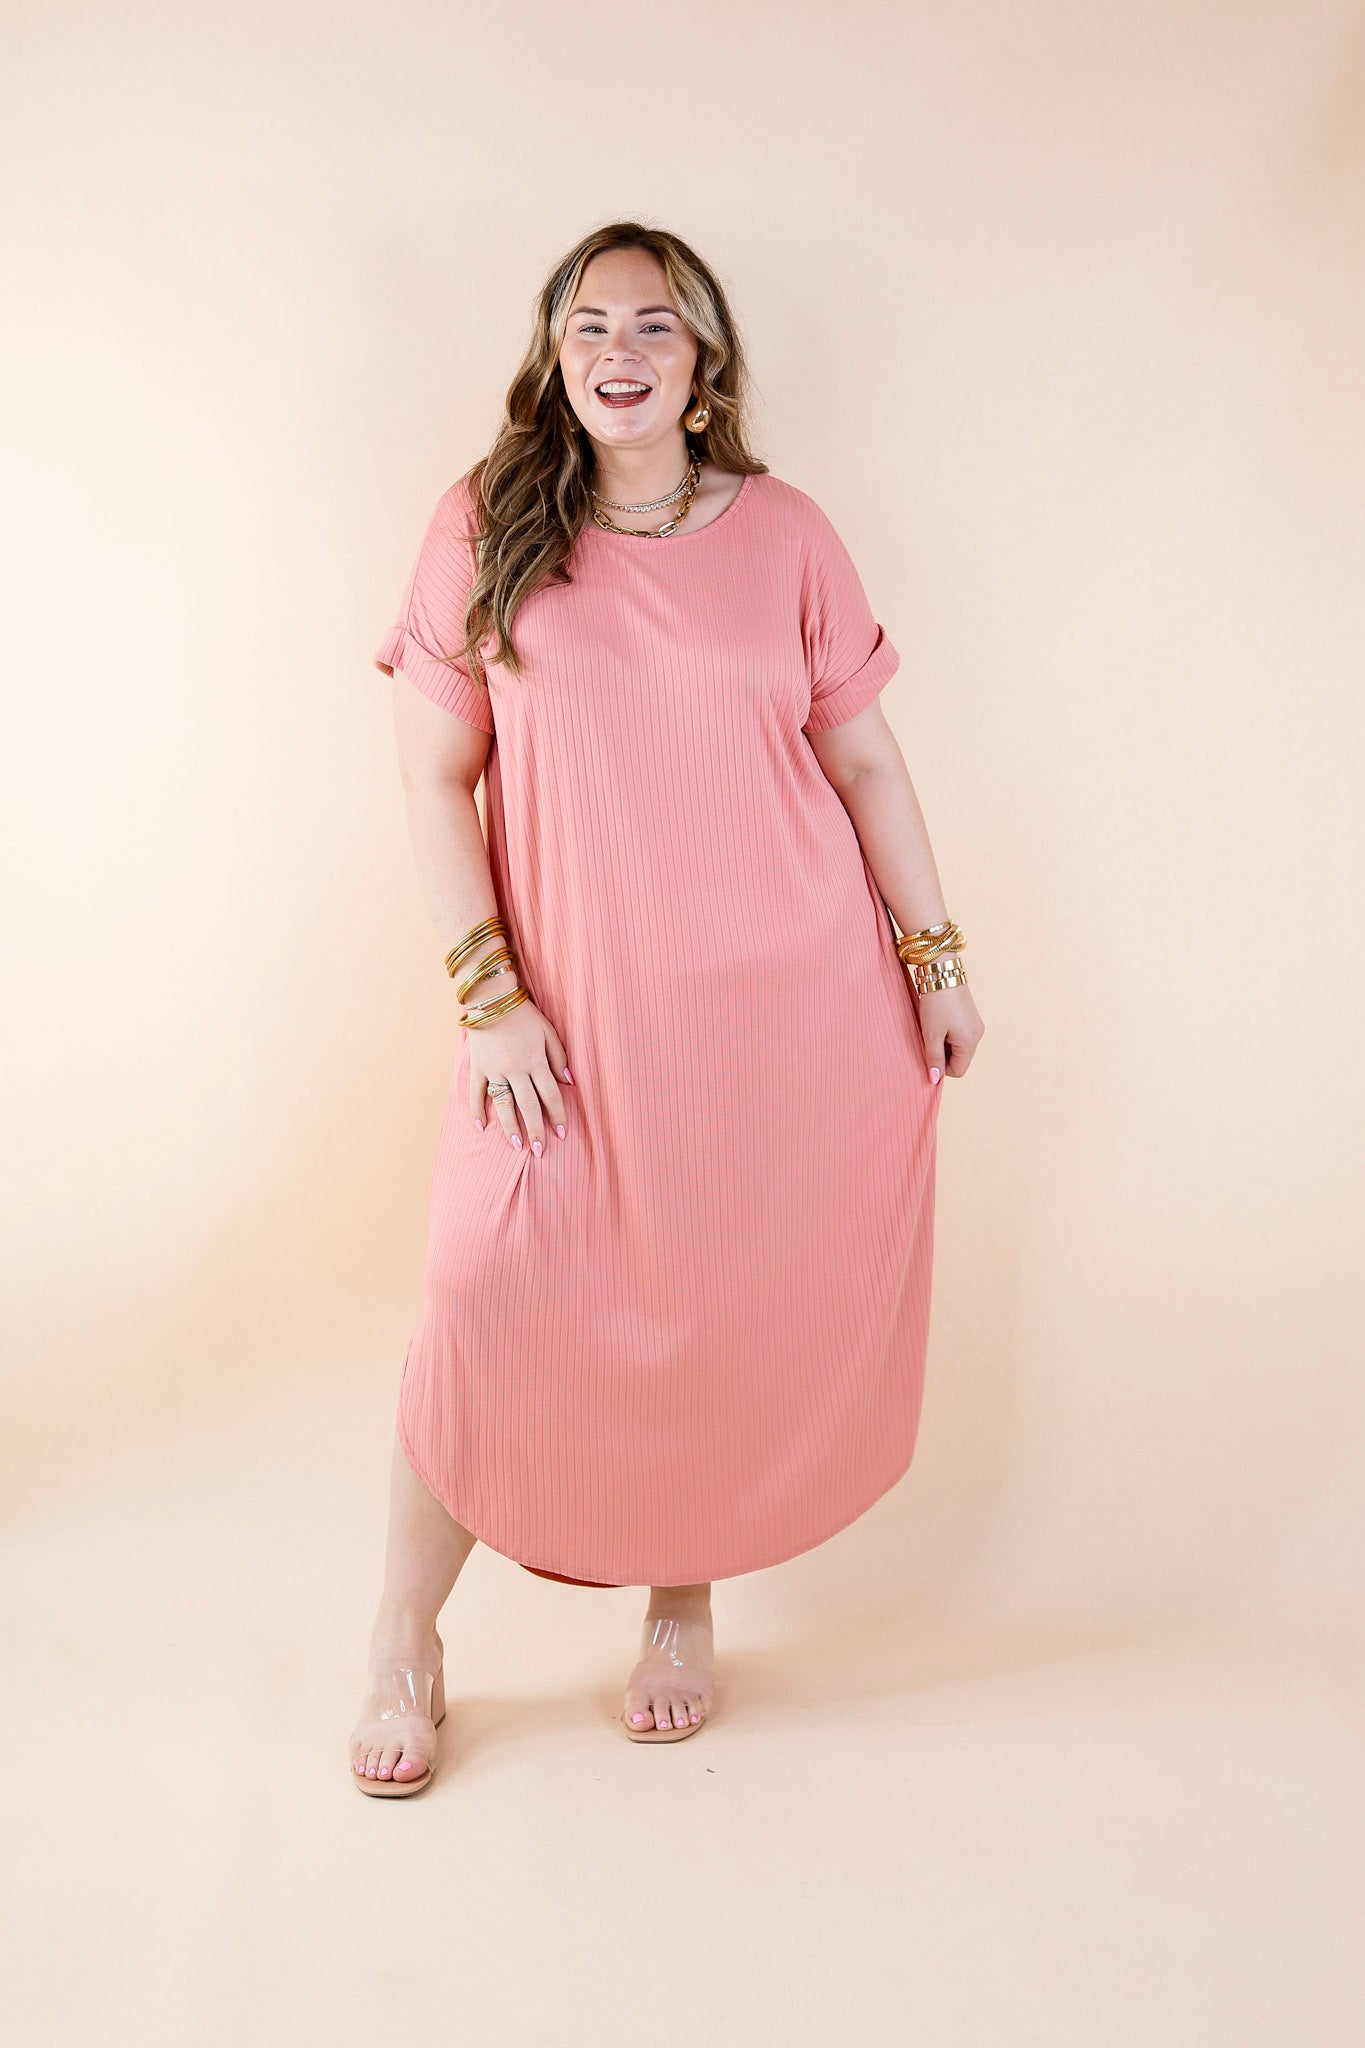 Chill Looks Short Sleeve Ribbed Midi Dress in Peach Pink - Giddy Up Glamour Boutique